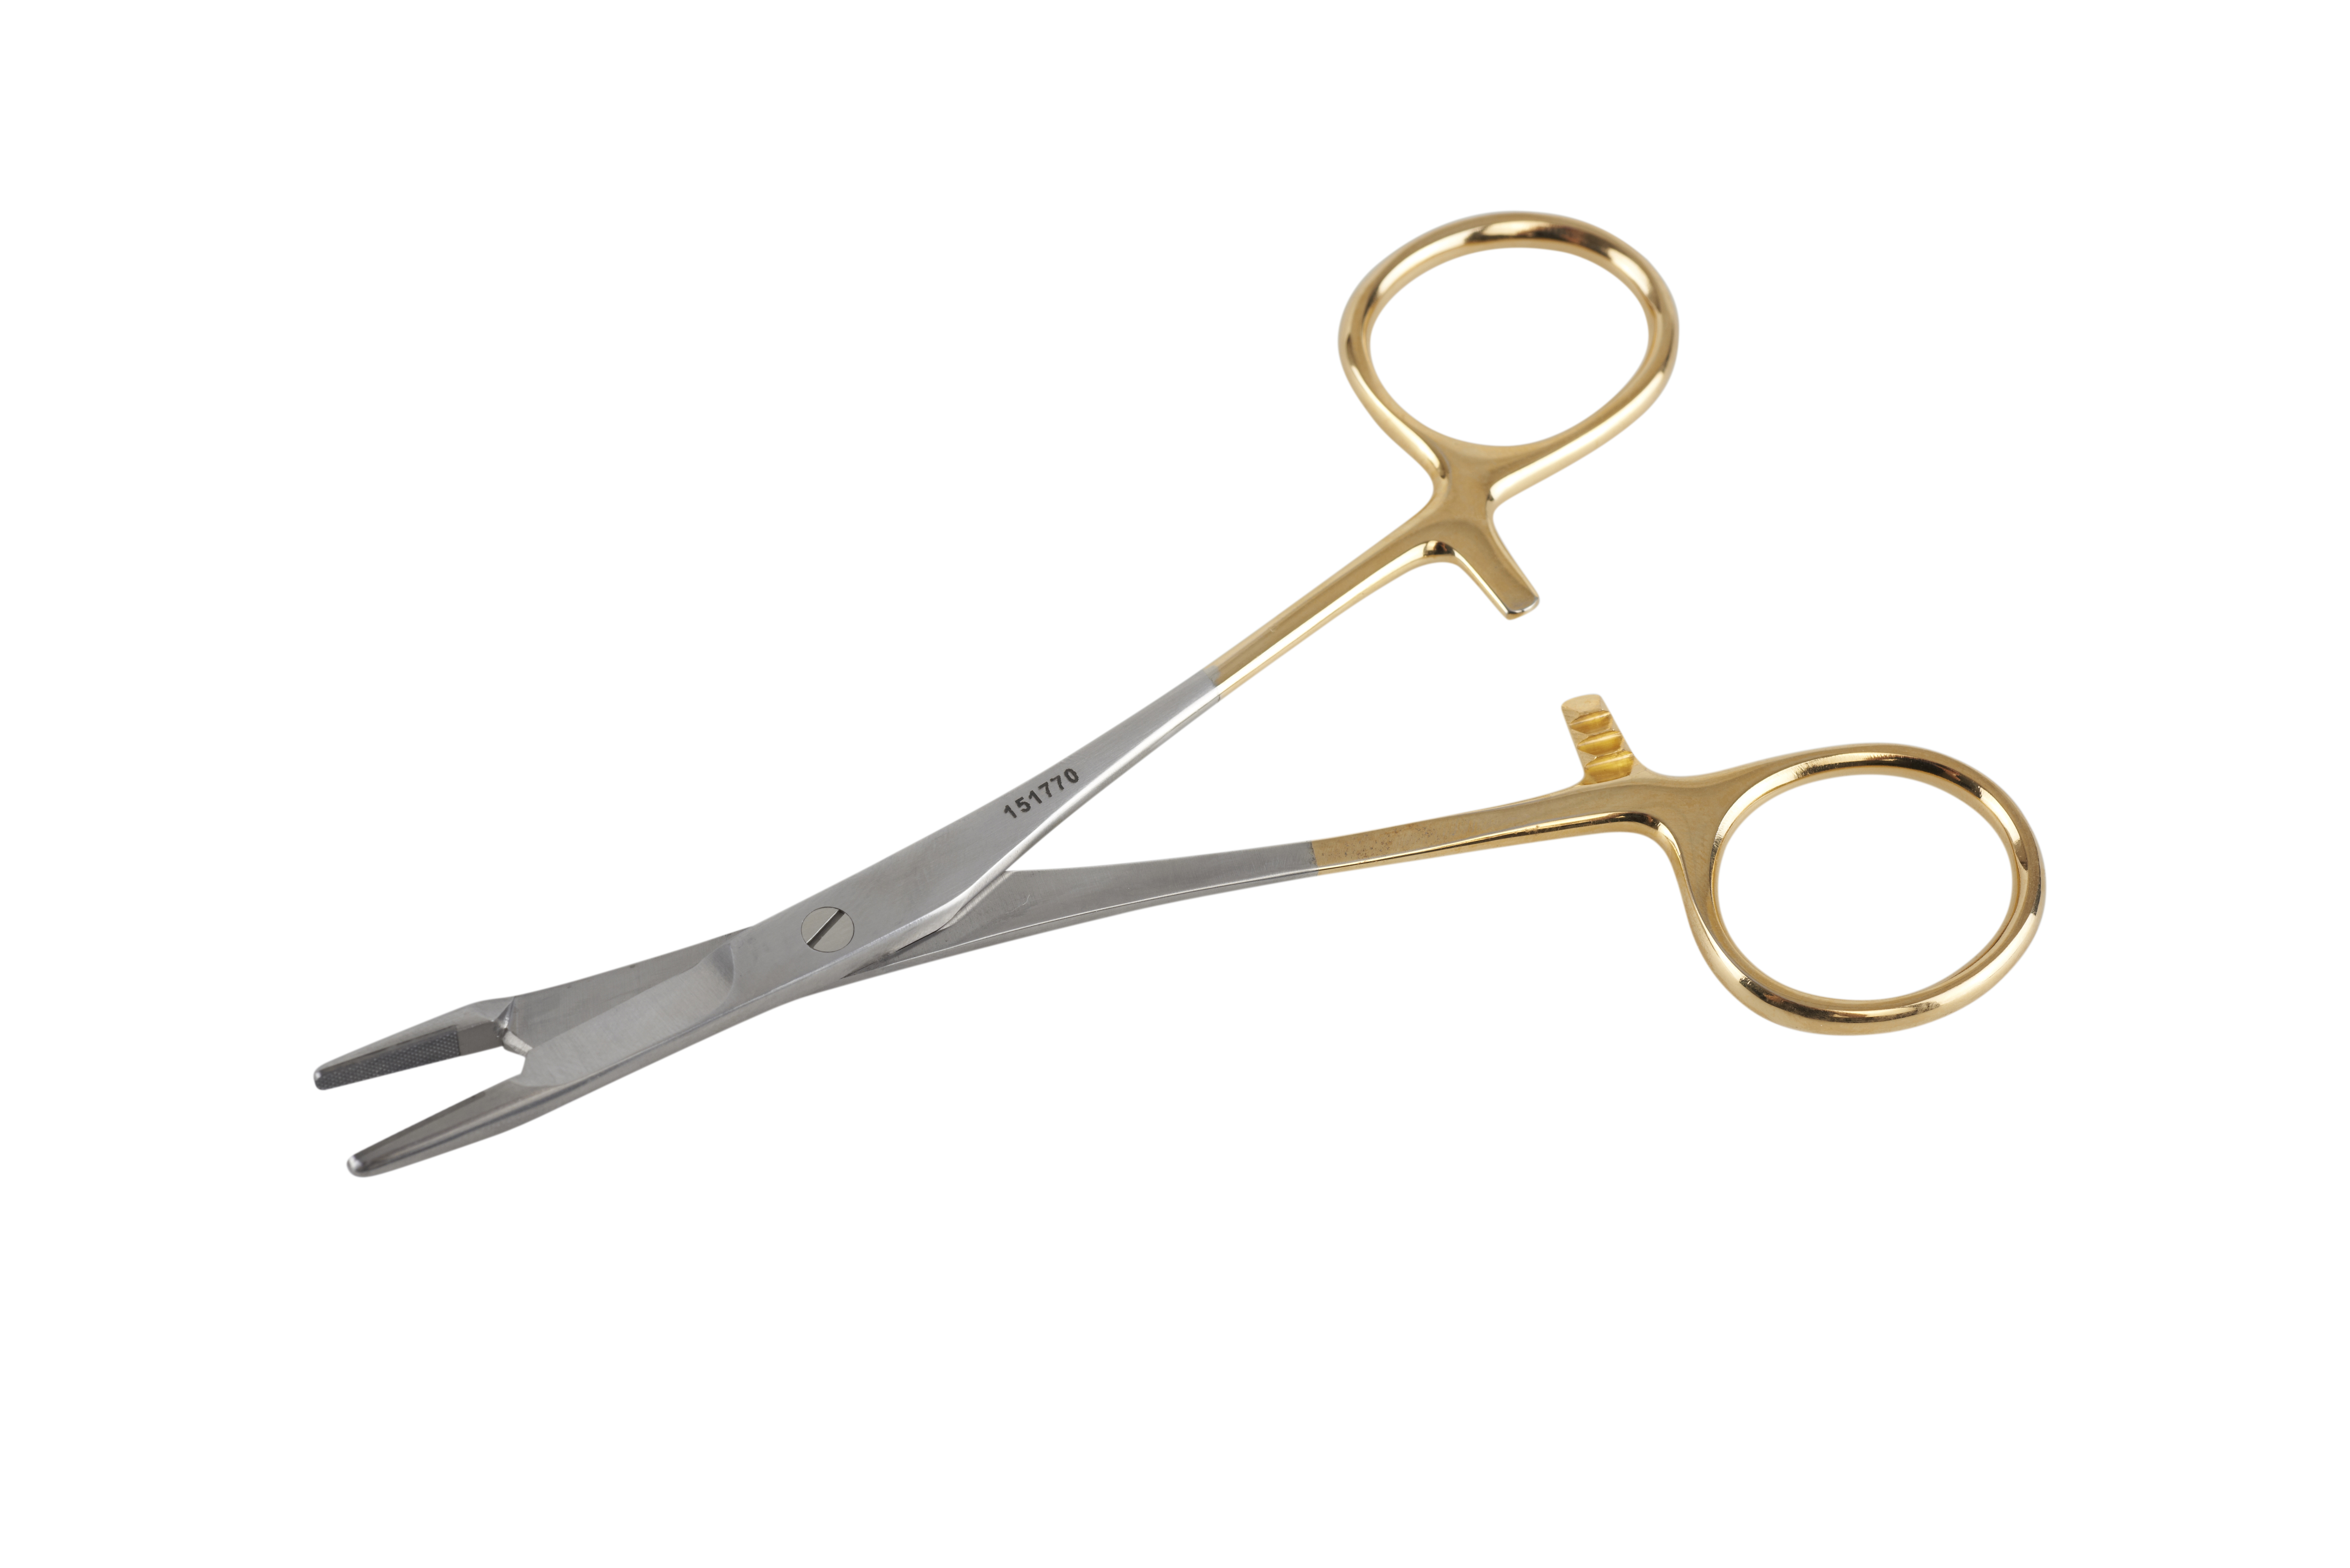 1 New German Premium 5.5 Inch 14cm Serrated Olsen HEGAR Needle Holder with Gold Rings Stainless Surgical Veterinary Instruments CYNAMED 